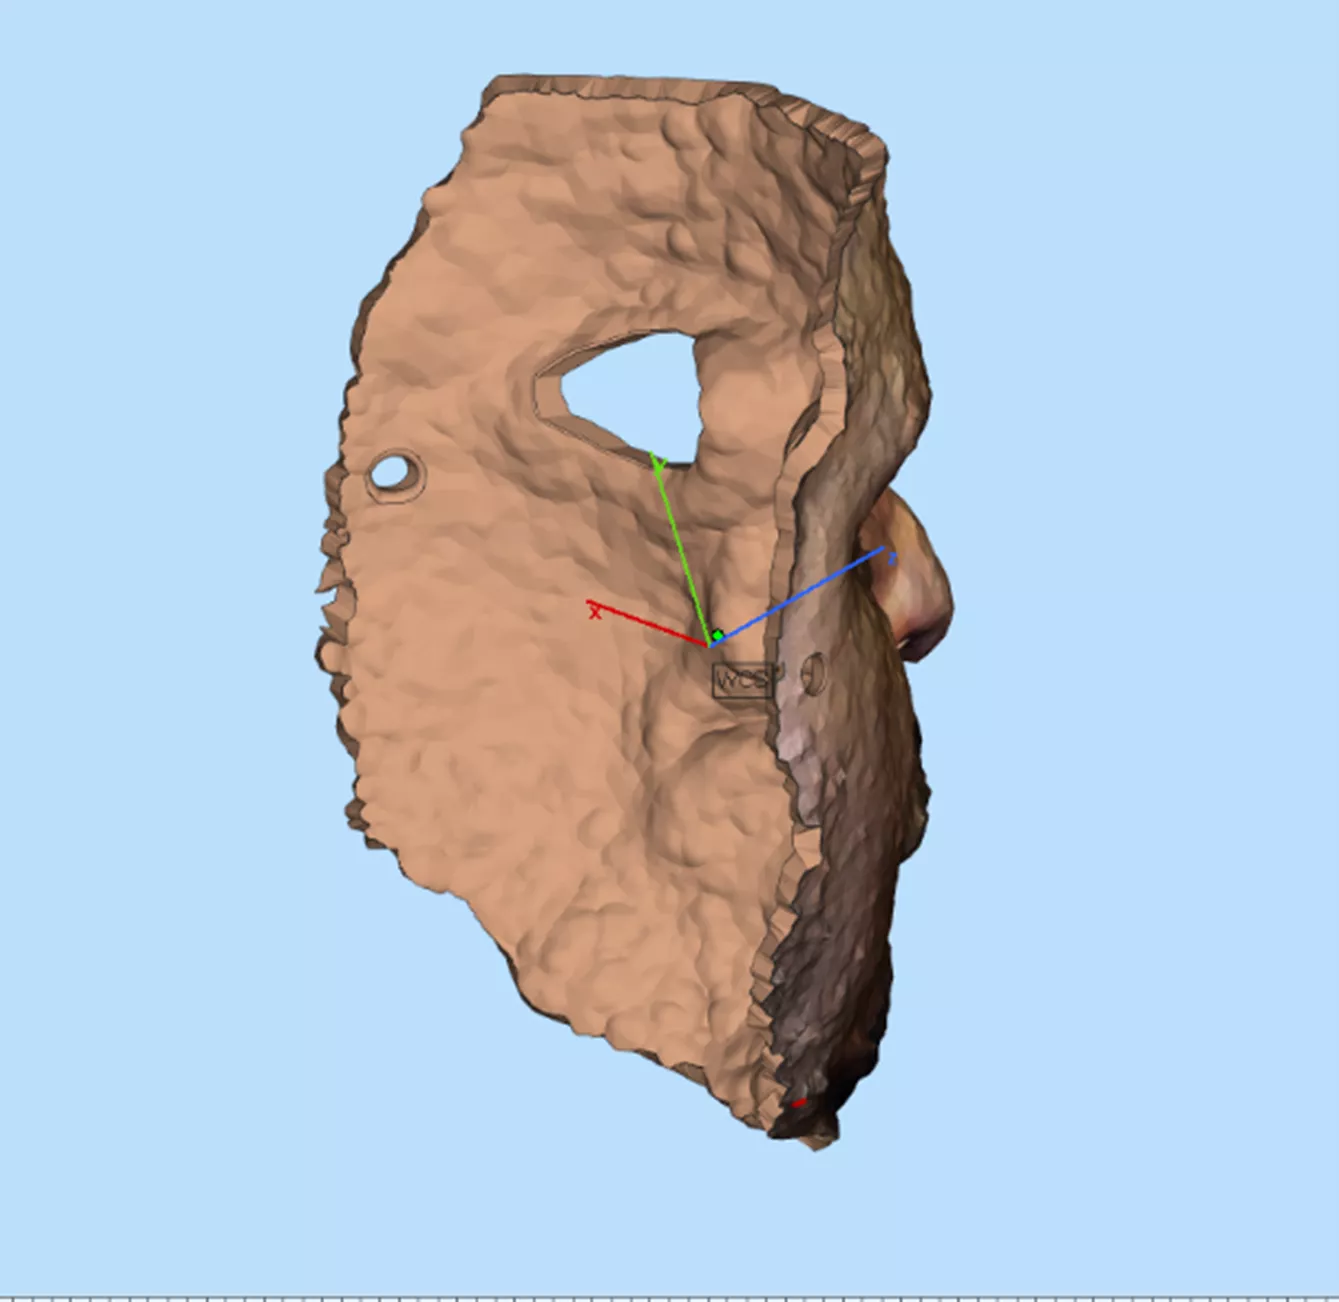 Human Face Solid Model in Materialise Magics 